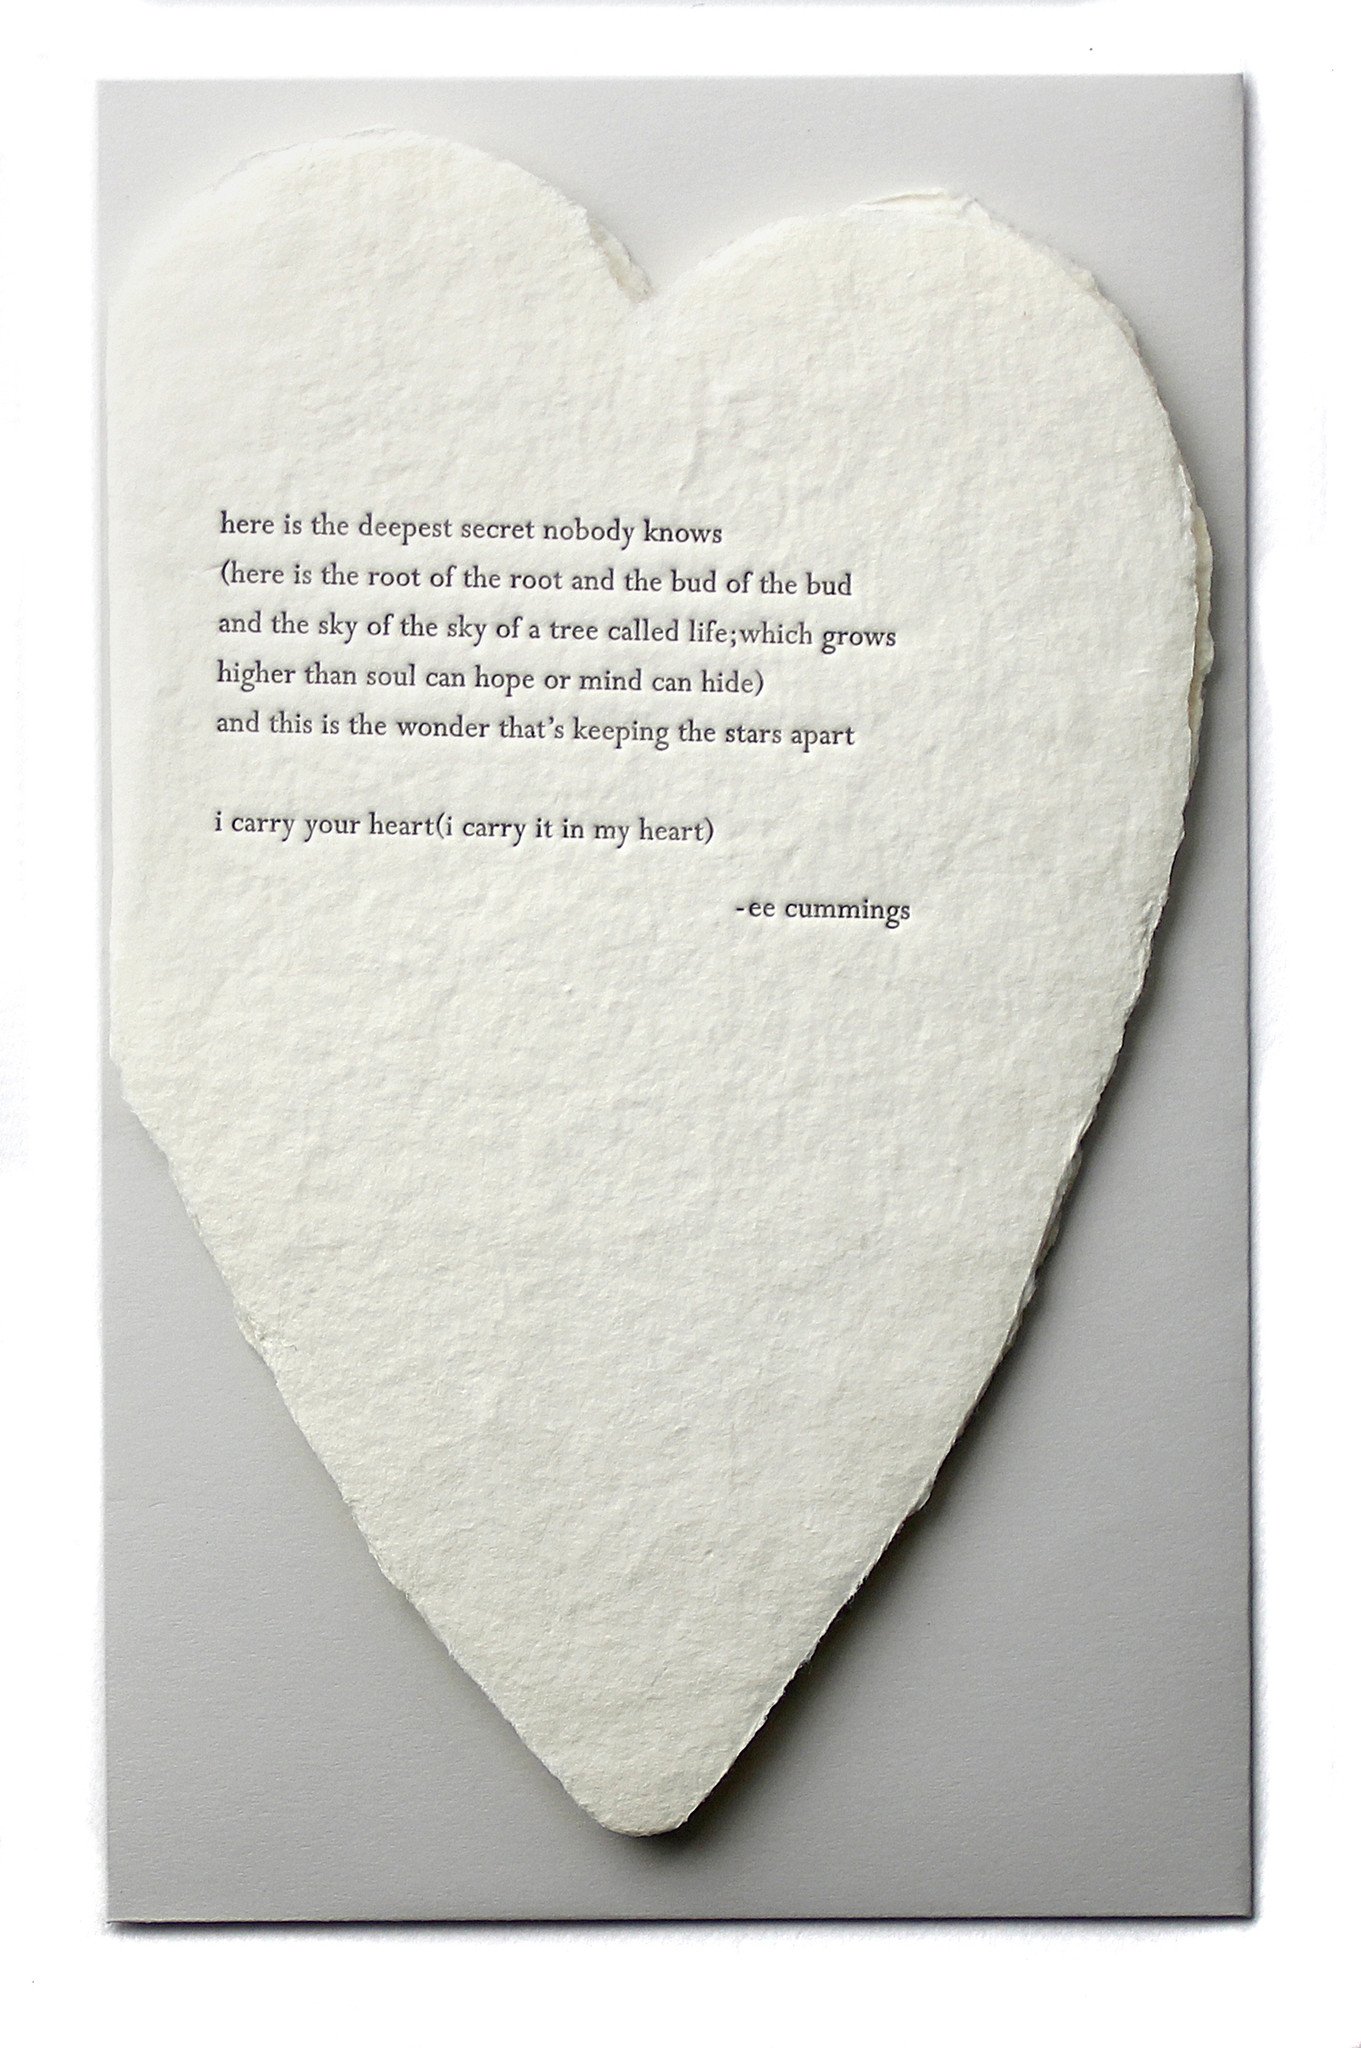 deckled paper heart with quote from ee cummings embossed